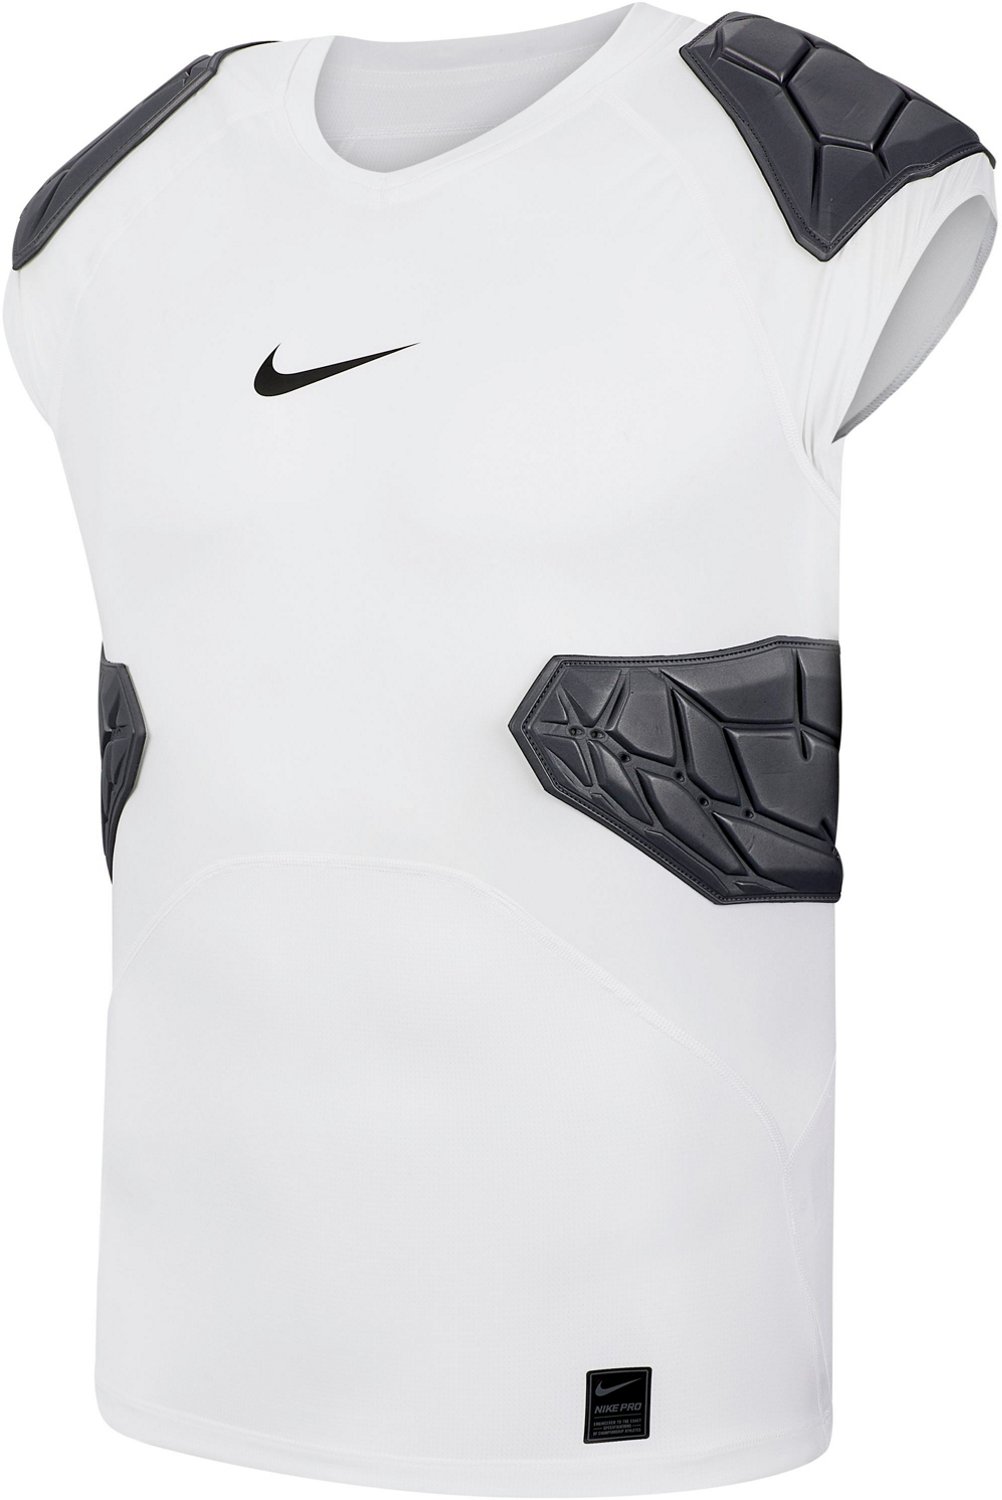 Nike Pro Hyperstrong 4 Pad Football Top